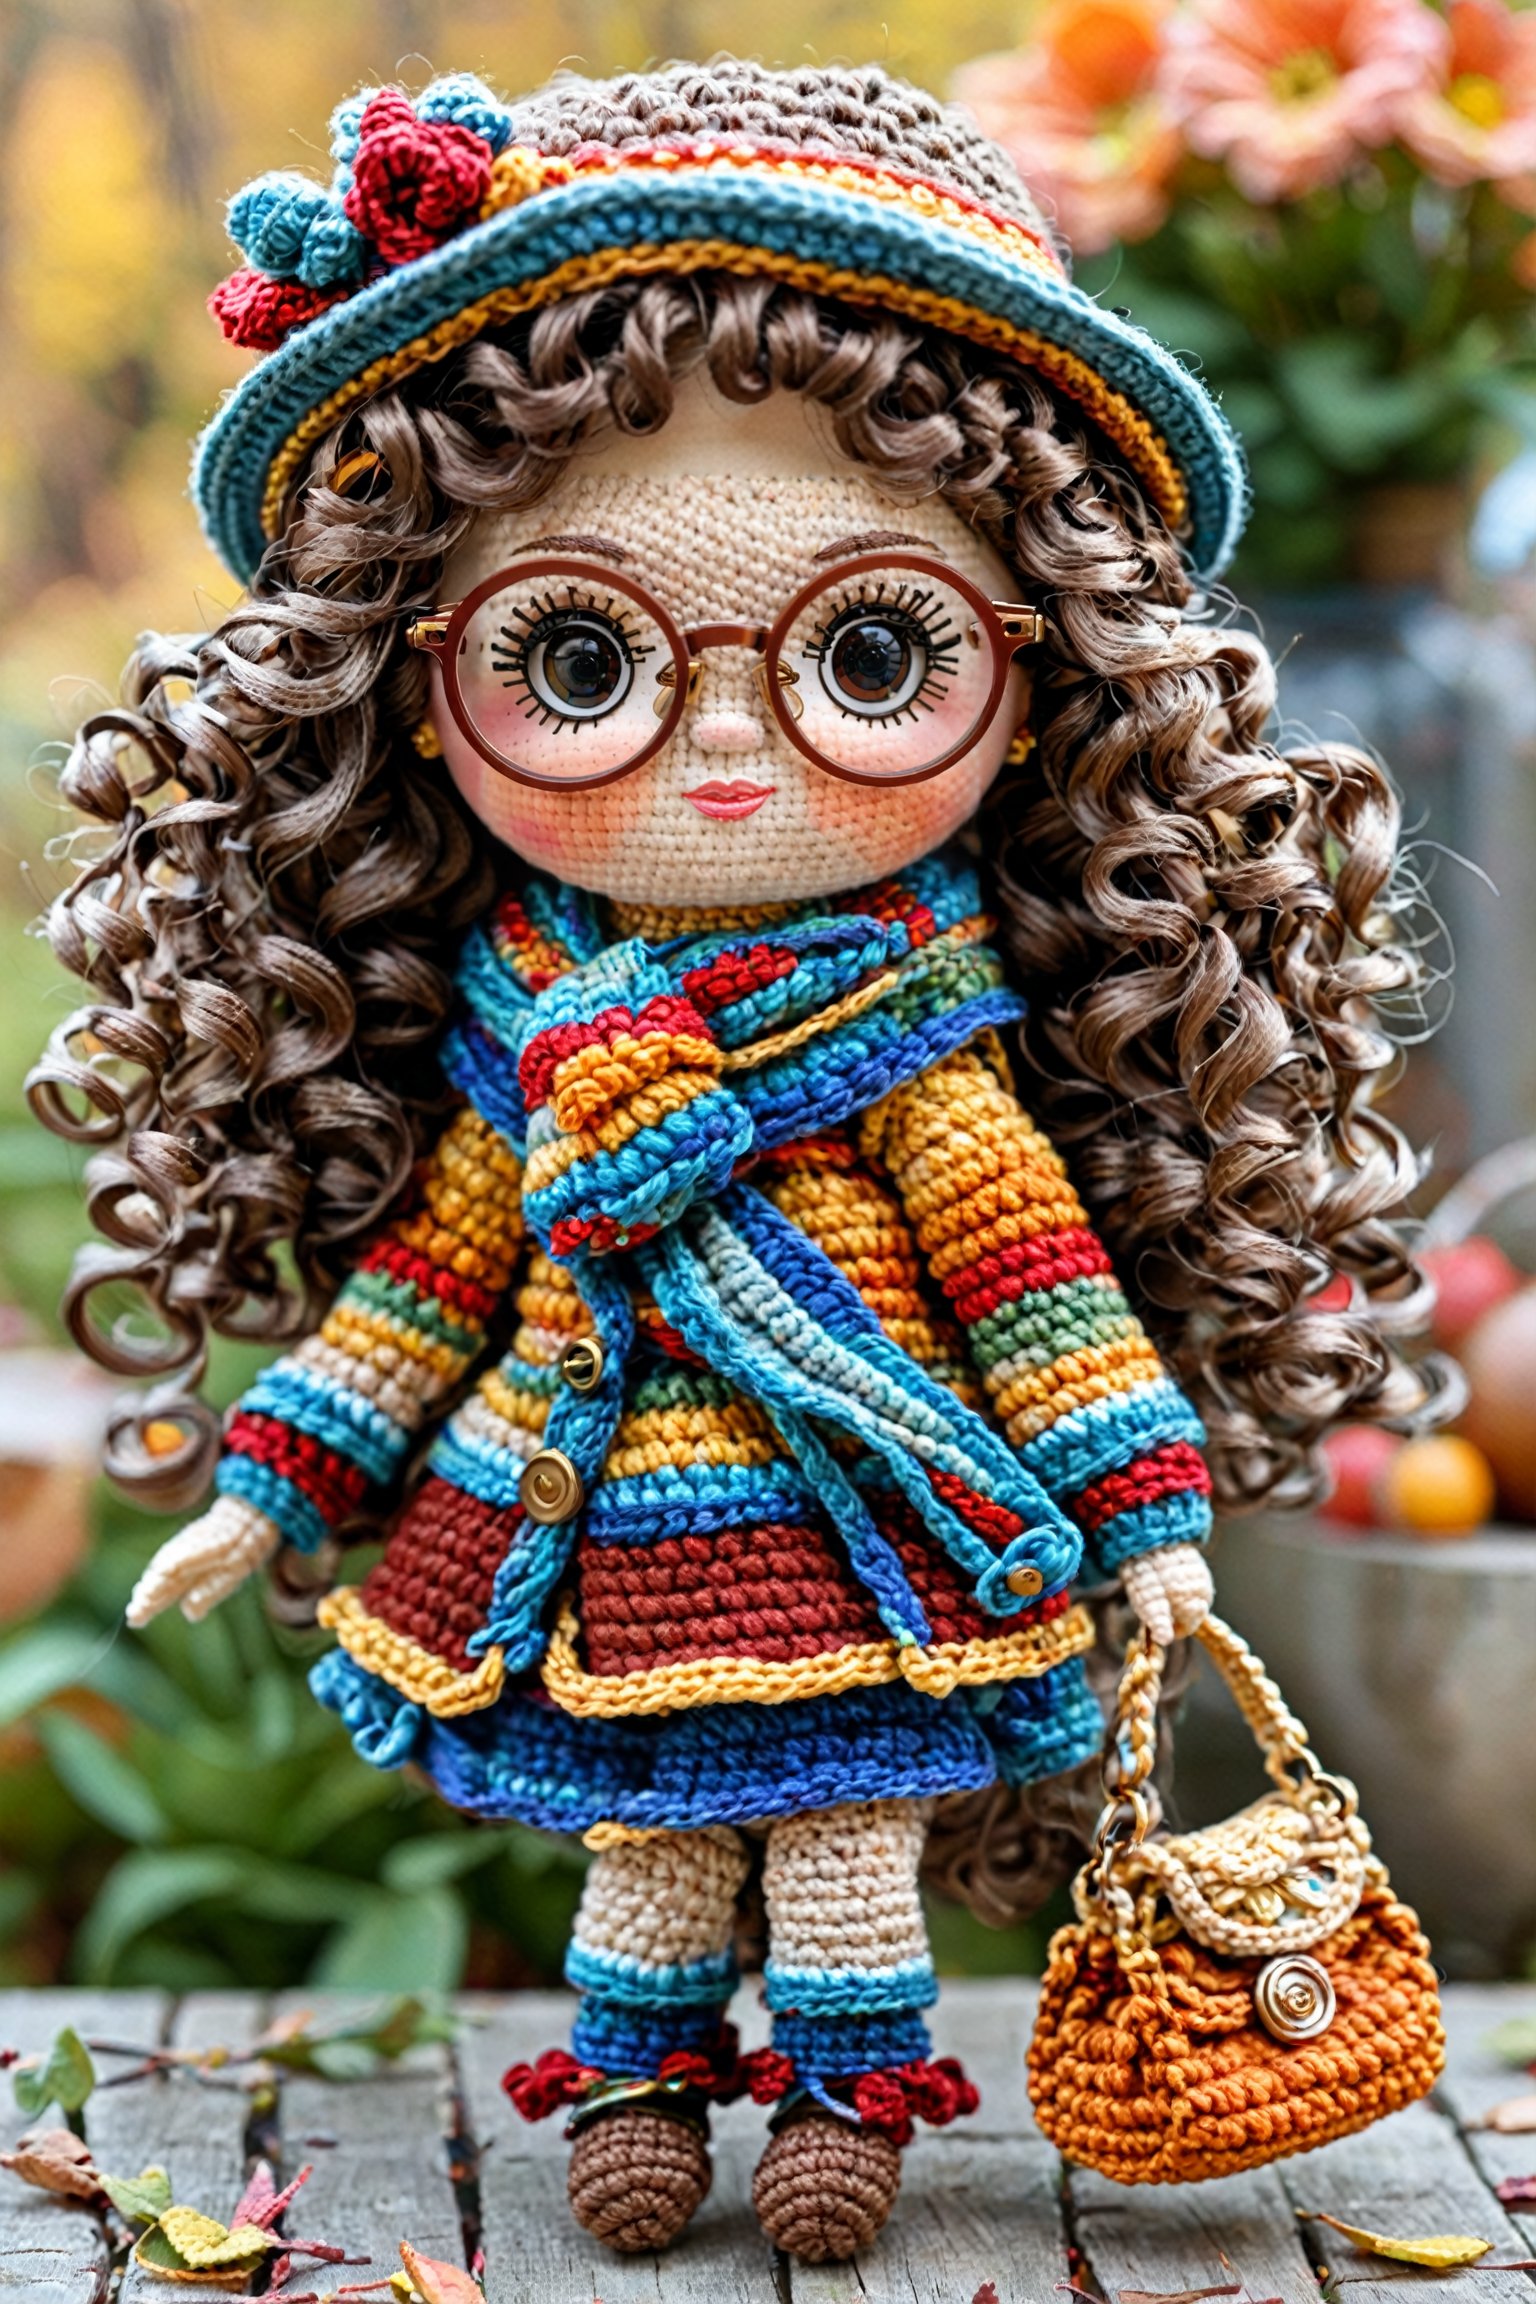 A meticulously crafted doll with large round glasses, curly brown hair, and rosy cheeks. The doll is dressed in a multi-colored crocheted outfit, consisting of a hat, scarf, and a sweater. She holds a small crocheted purse in her hand. The background is blurred, but it seems to be an outdoor setting with autumnal colors, suggesting a fall season.